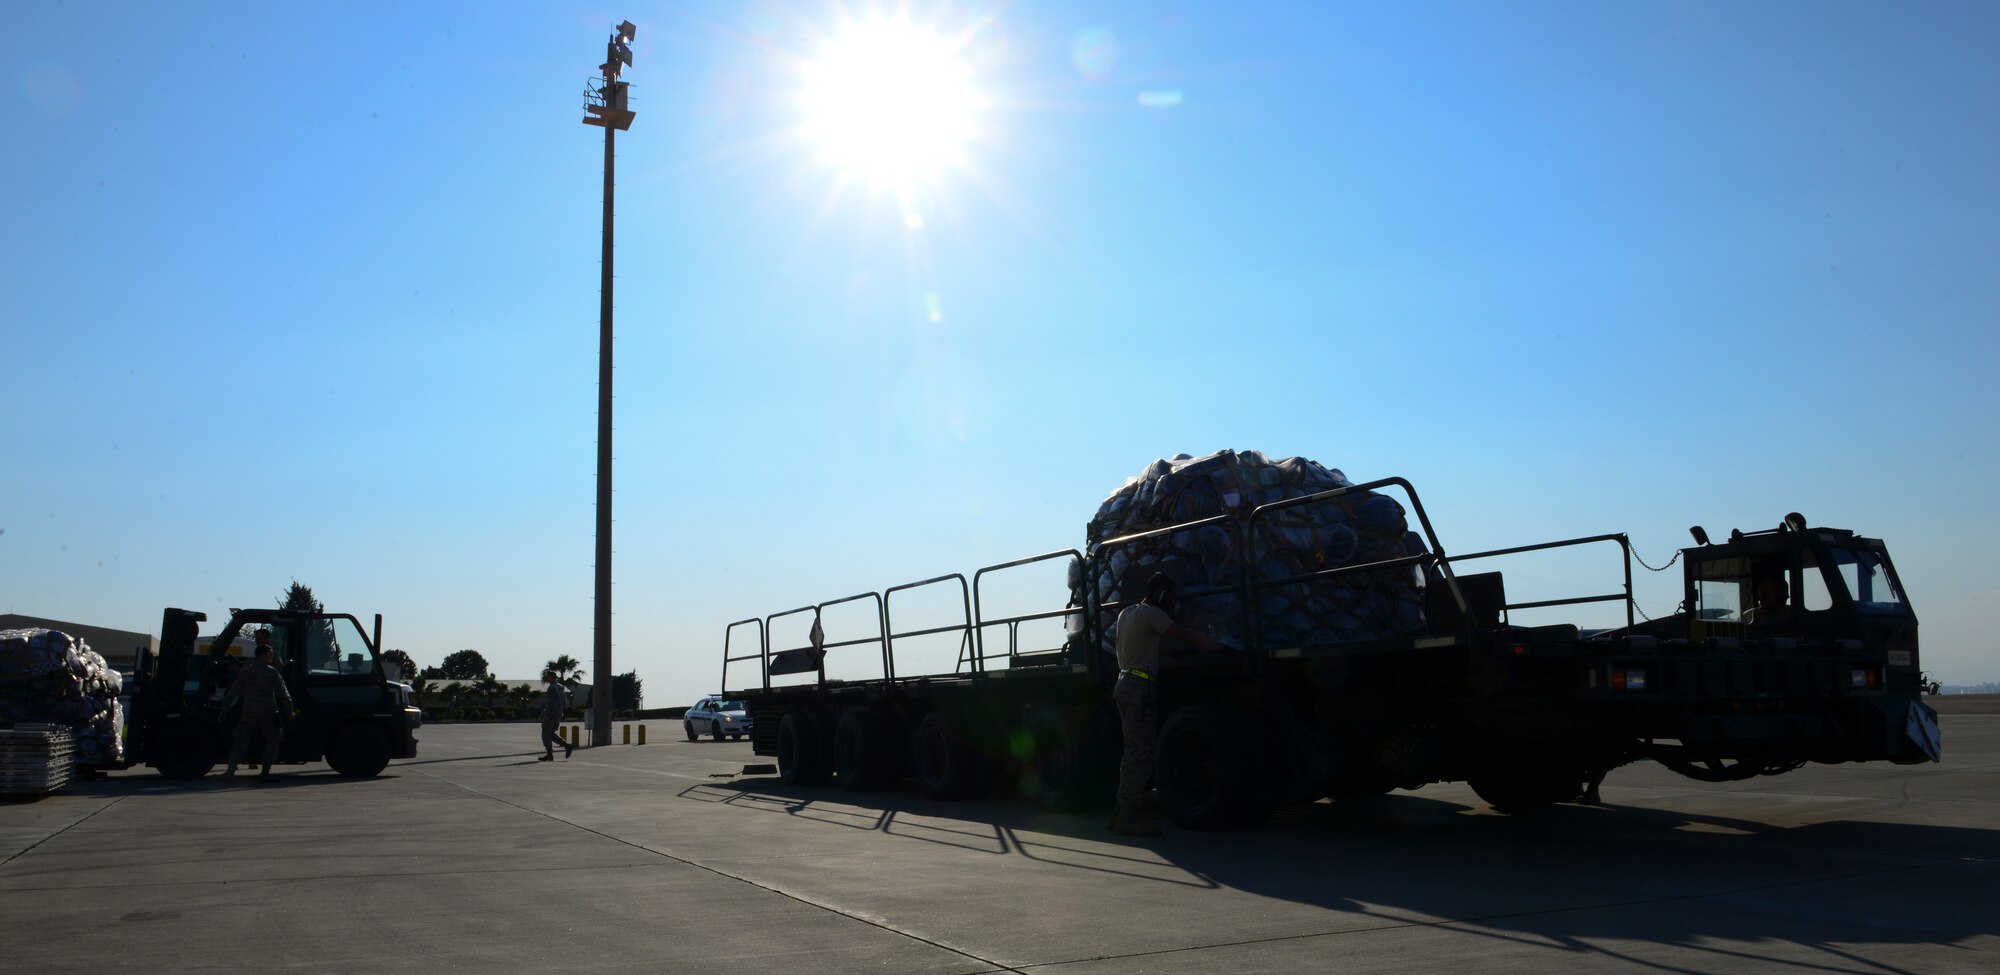 Members of the 728th Air Mobility Squadron load a Halverson lift with luggage, March 31, 2016, at Incirlik Air Base, Turkey. The 728th AMS built, staged and transported the pallets to load in an aircraft to aid in the process of an ordered departure. (U.S. Air Force photo by Staff Sgt. Caleb Pierce/Released)